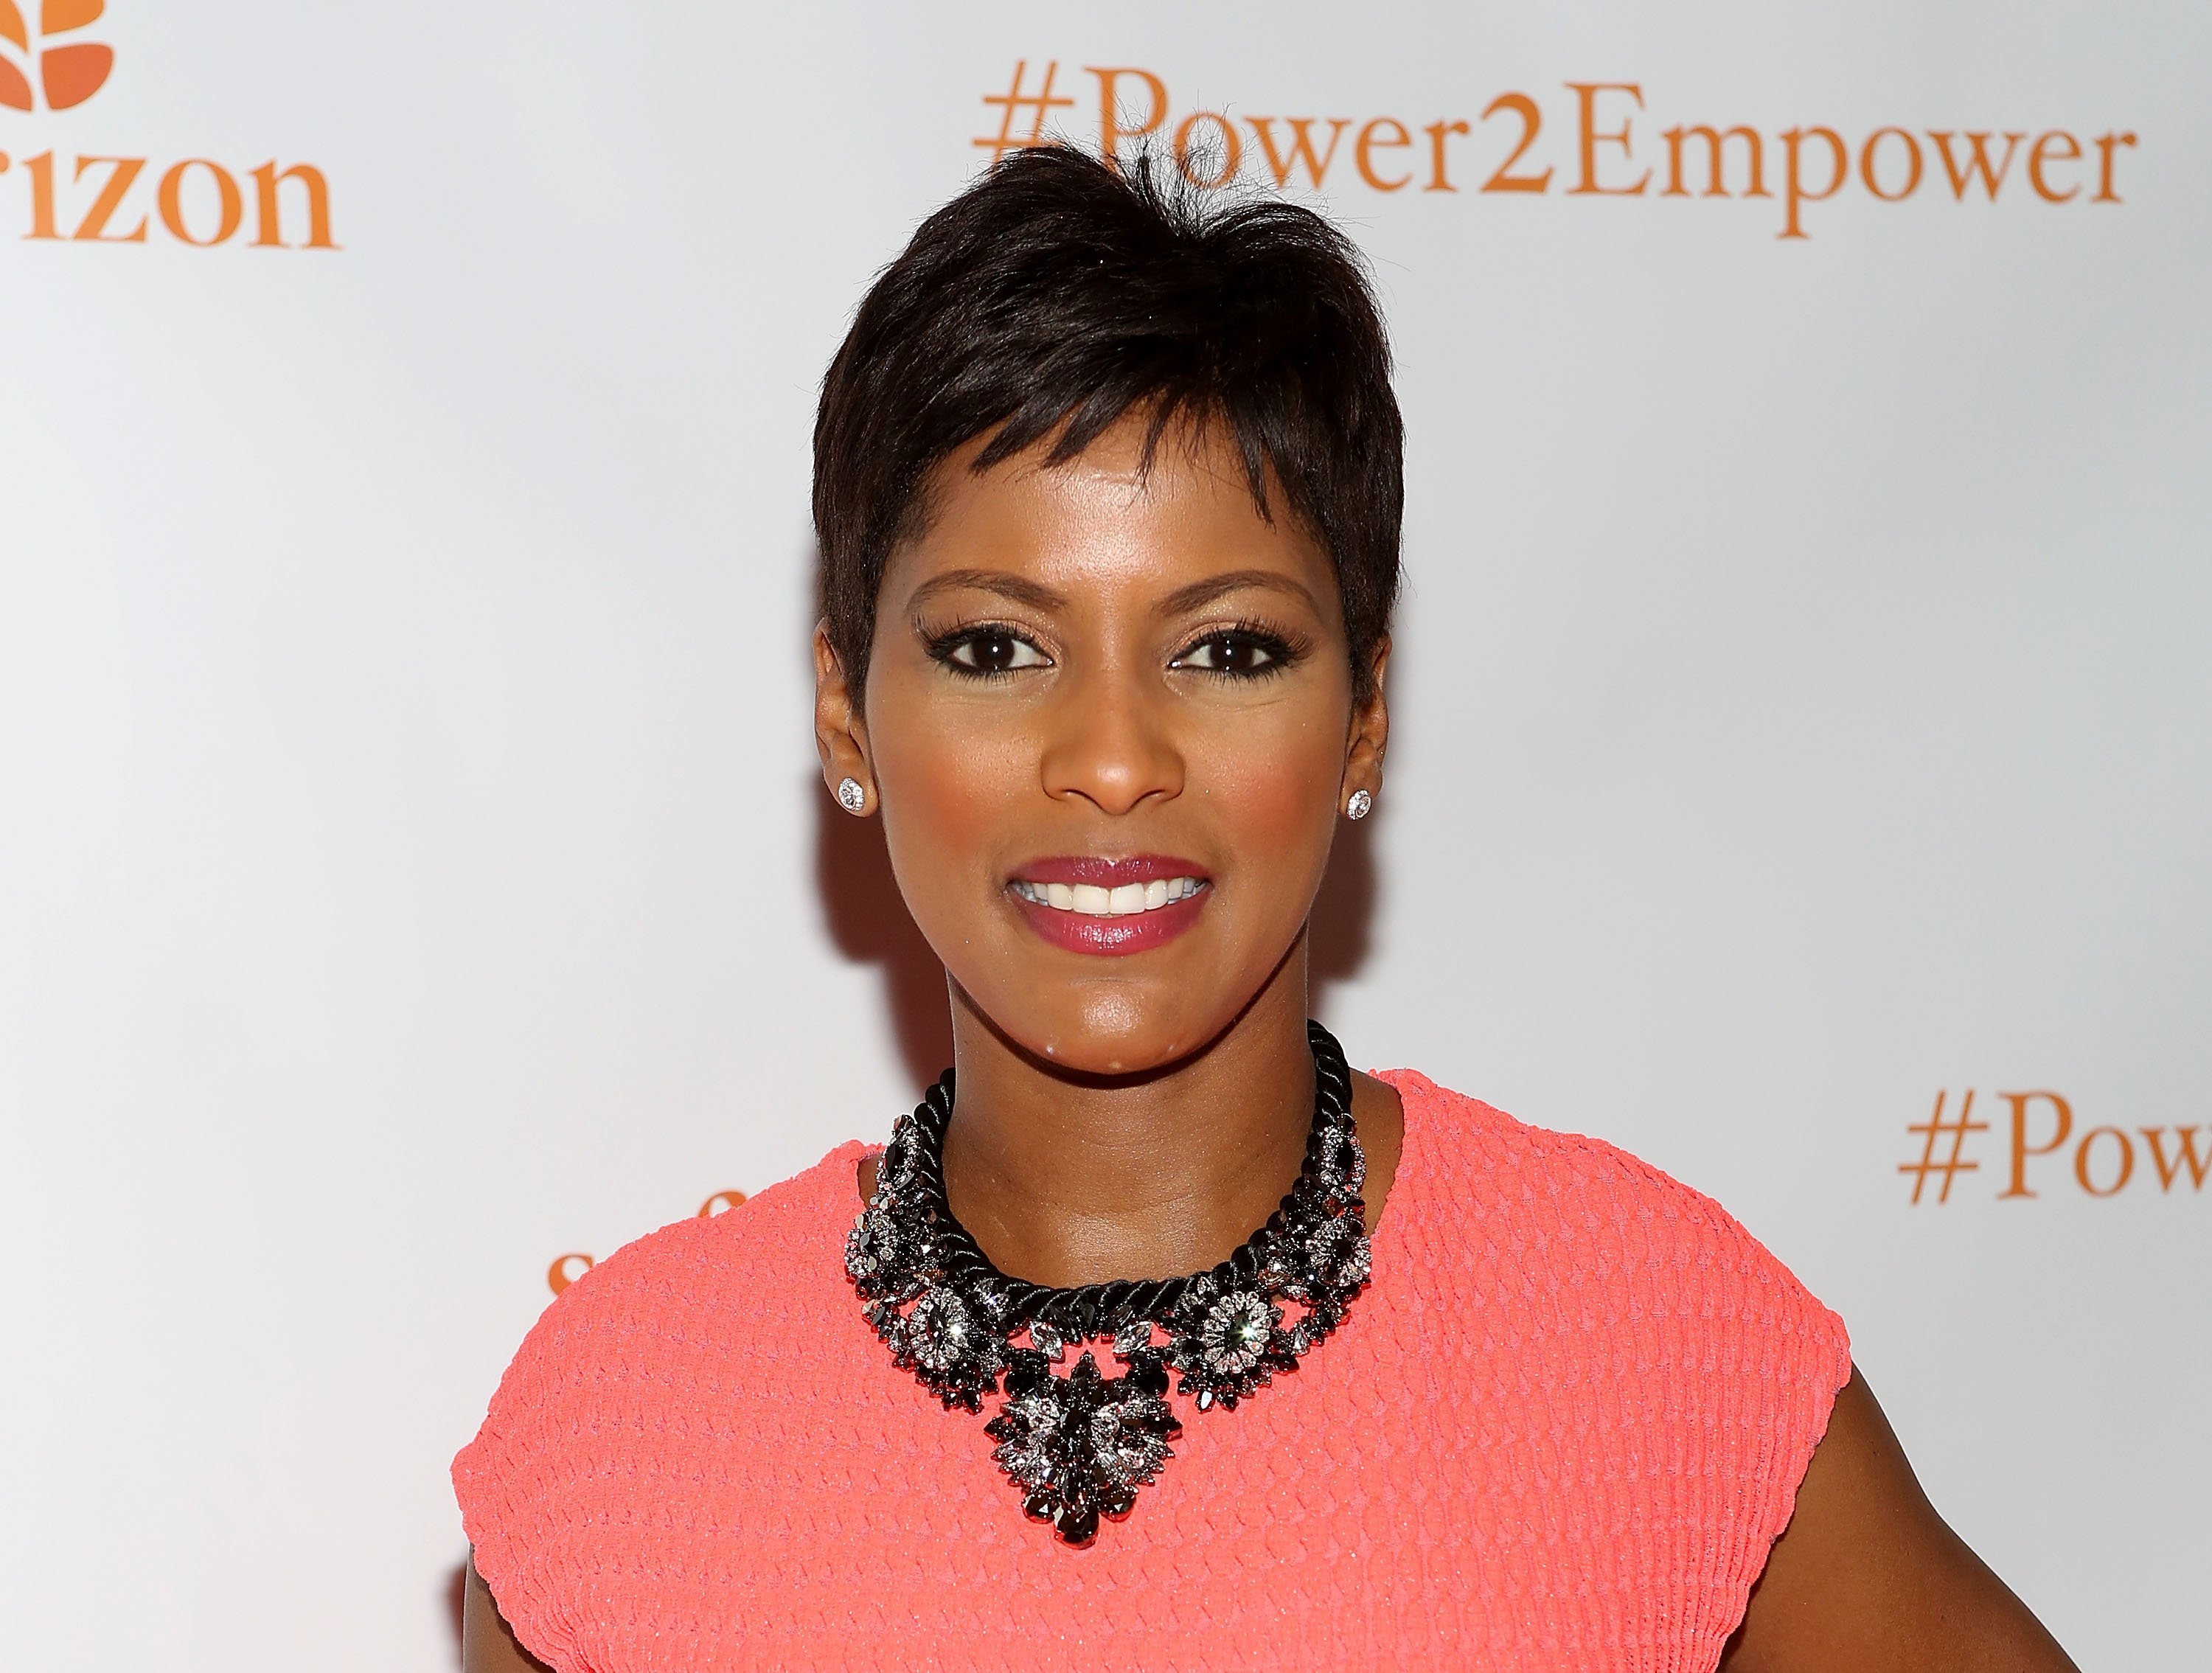 Tamron Hall attends Safe Horizon's 2014 Champion Awards at Pier Sixty at Chelsea Piers on April 30, 2014. | Photo: GettyImages